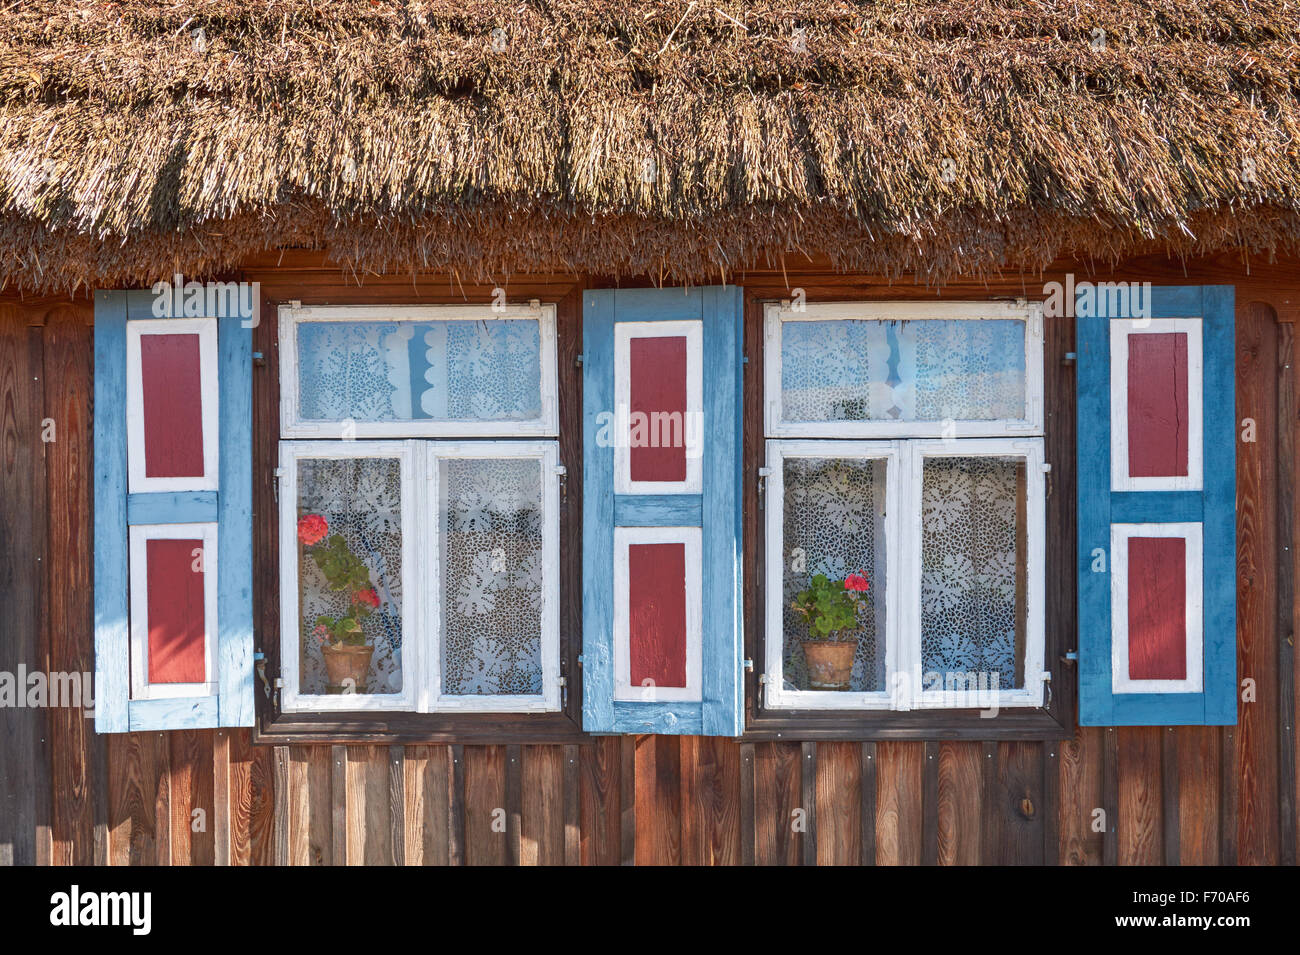 The Museum of the Mazovian Countryside in Sierpc, Poland. Old wooden peasant thatched farmhouse with decorative shutters. Stock Photo